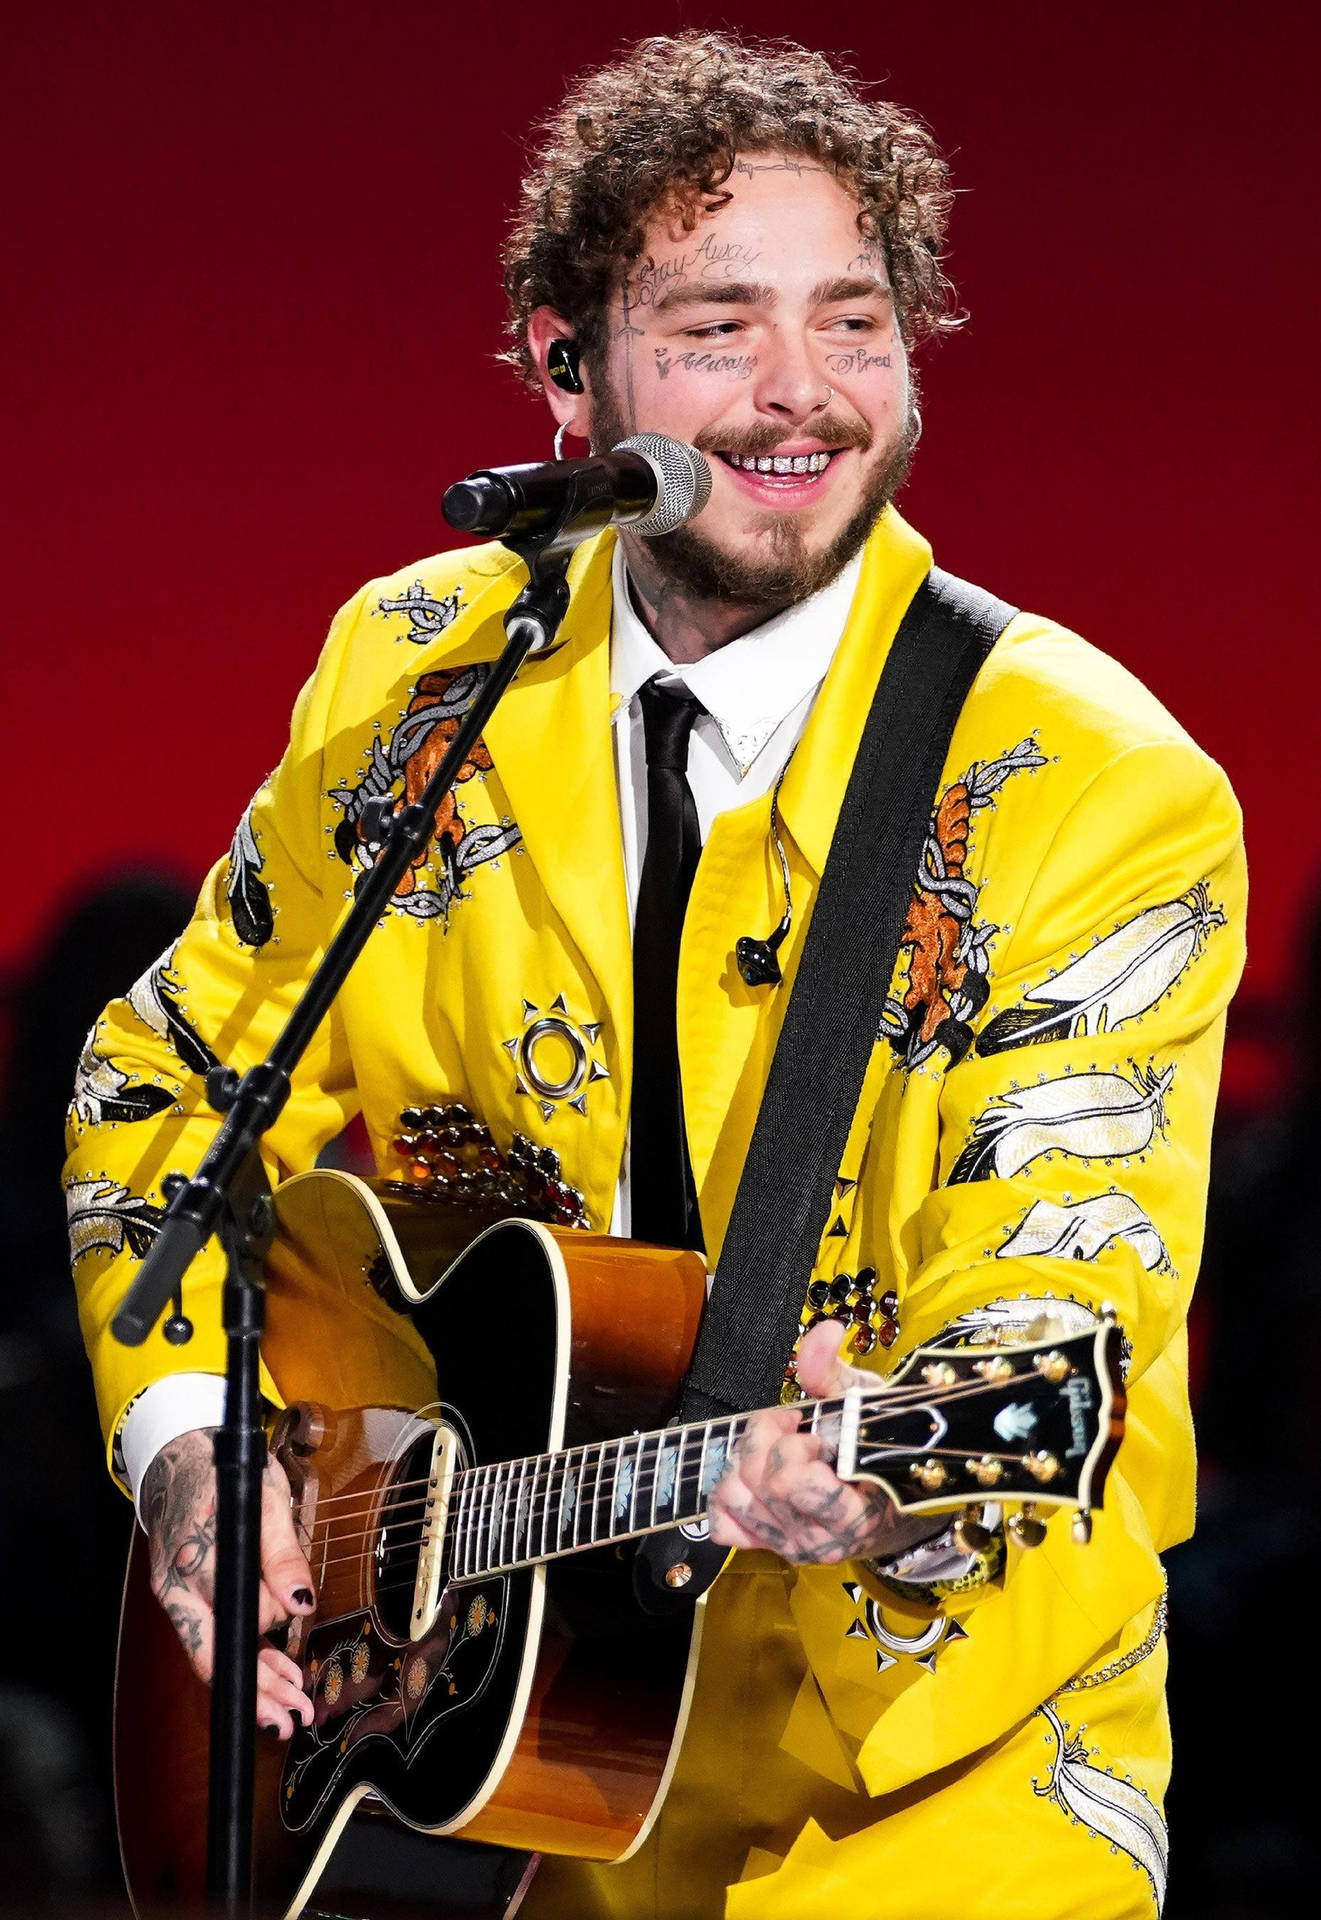 1920x1080 Post Malone 4k 2019 Laptop Full HD 1080P HD 4k Wallpapers  Images Backgrounds Photos and Pictures